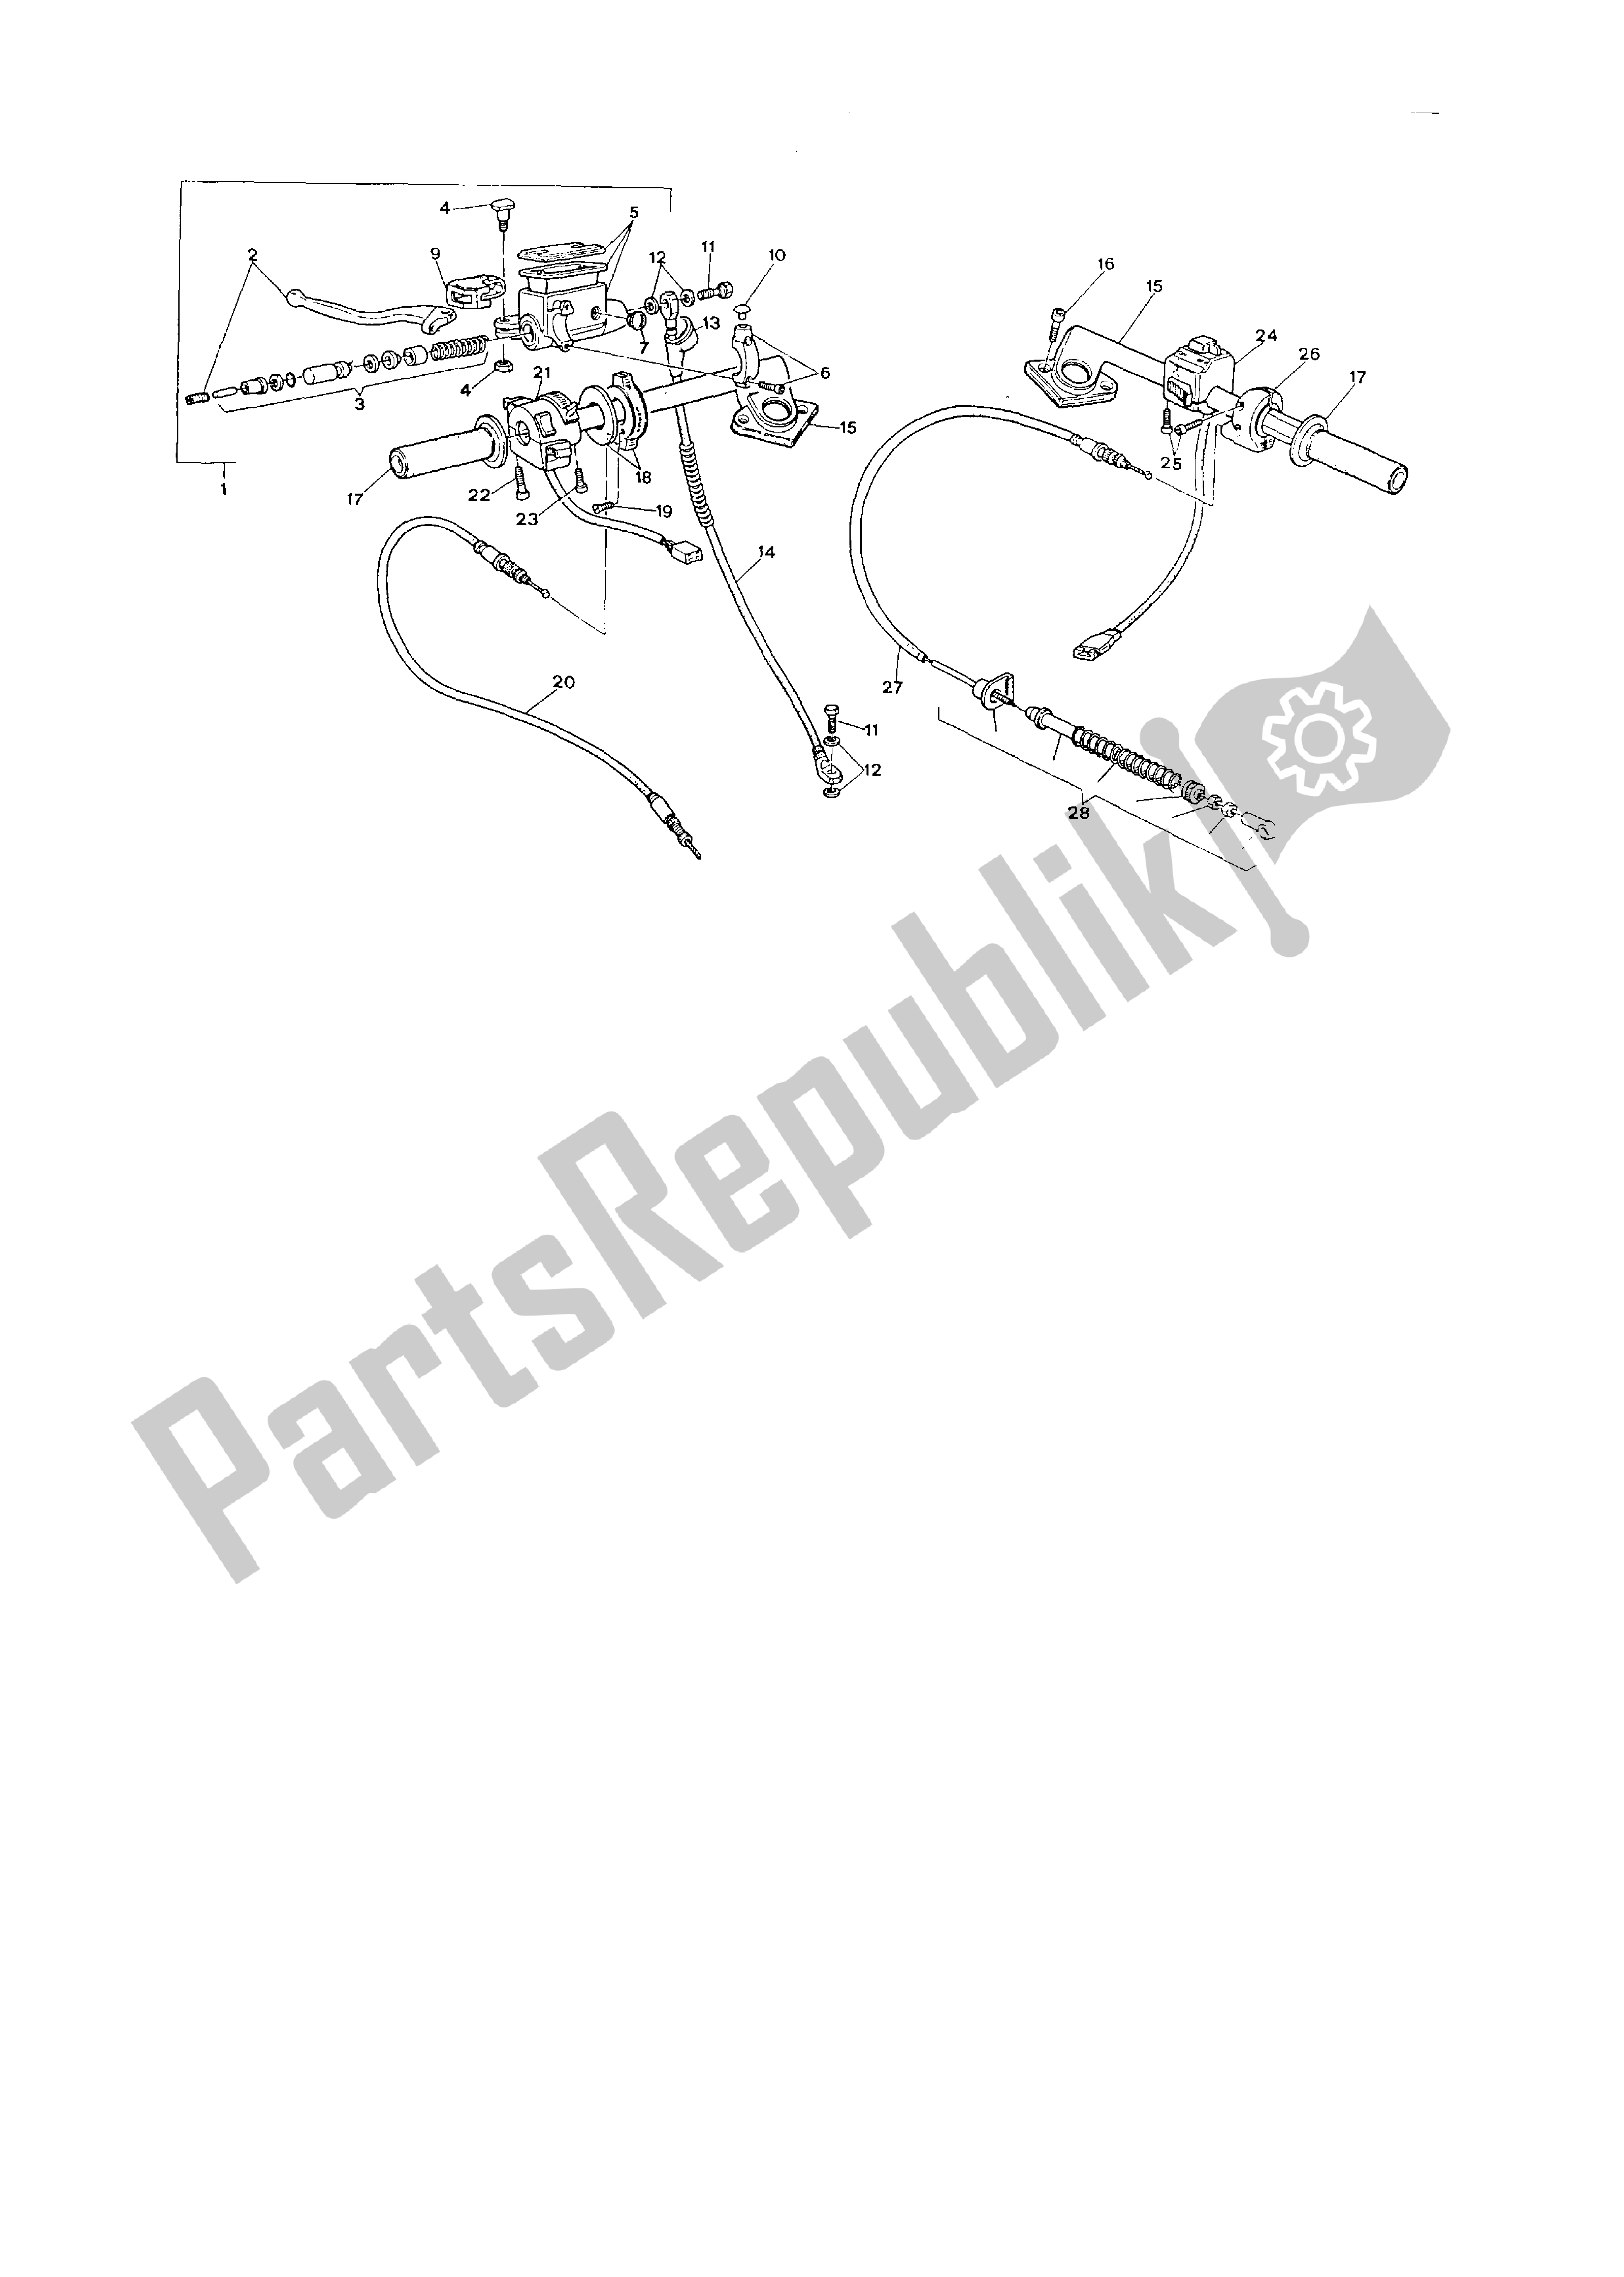 All parts for the Handlebar And Controls of the Ducati Paso 750 1986 - 1988